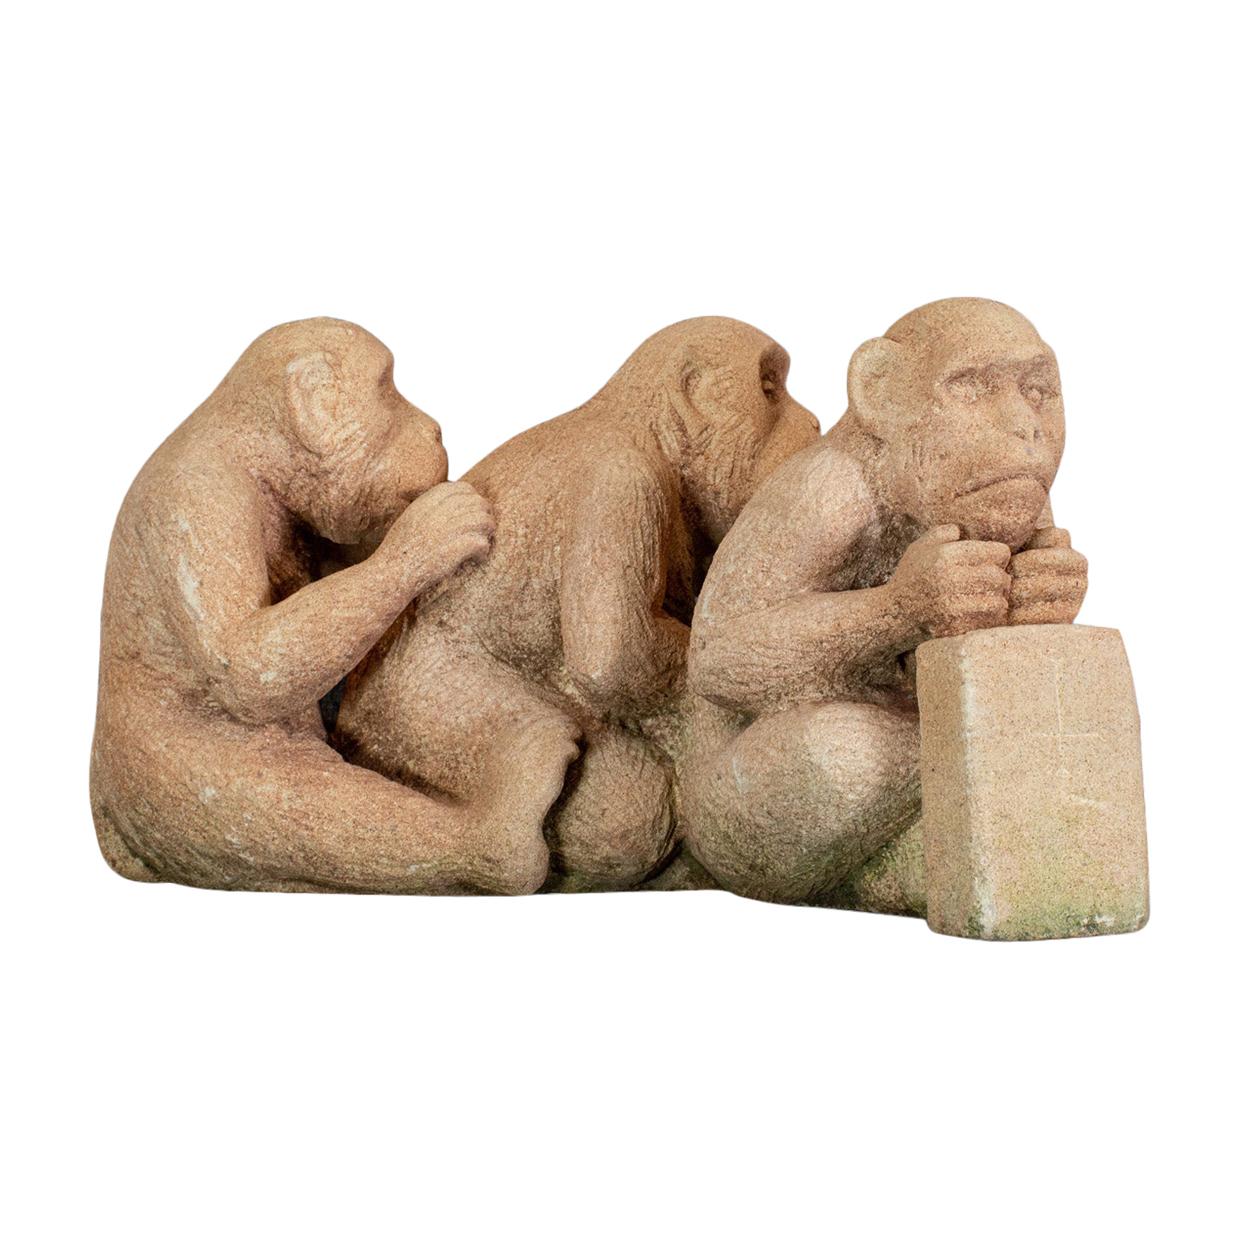 Sculpture of Sitting Macaques, English, Bath Stone, Dominic Hurley For Sale